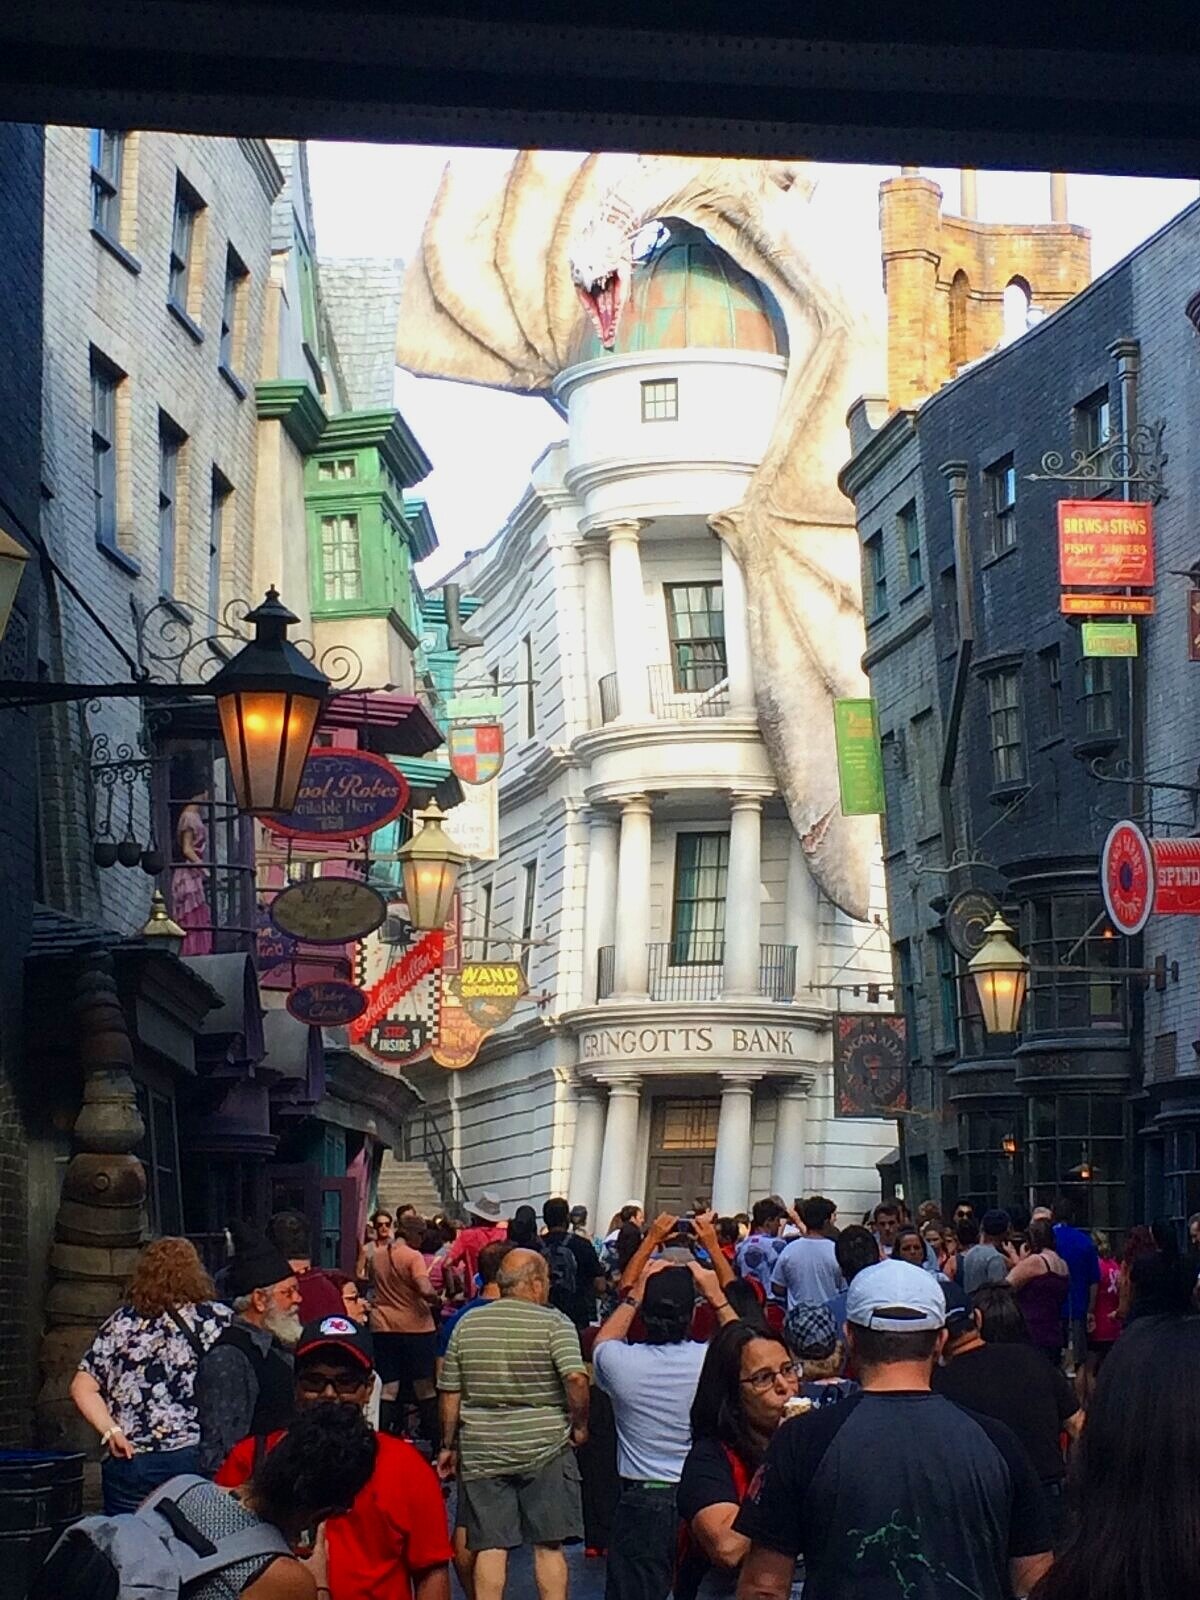 The Wizarding World of Harry Potter & Other Highlights of, wizarding world  